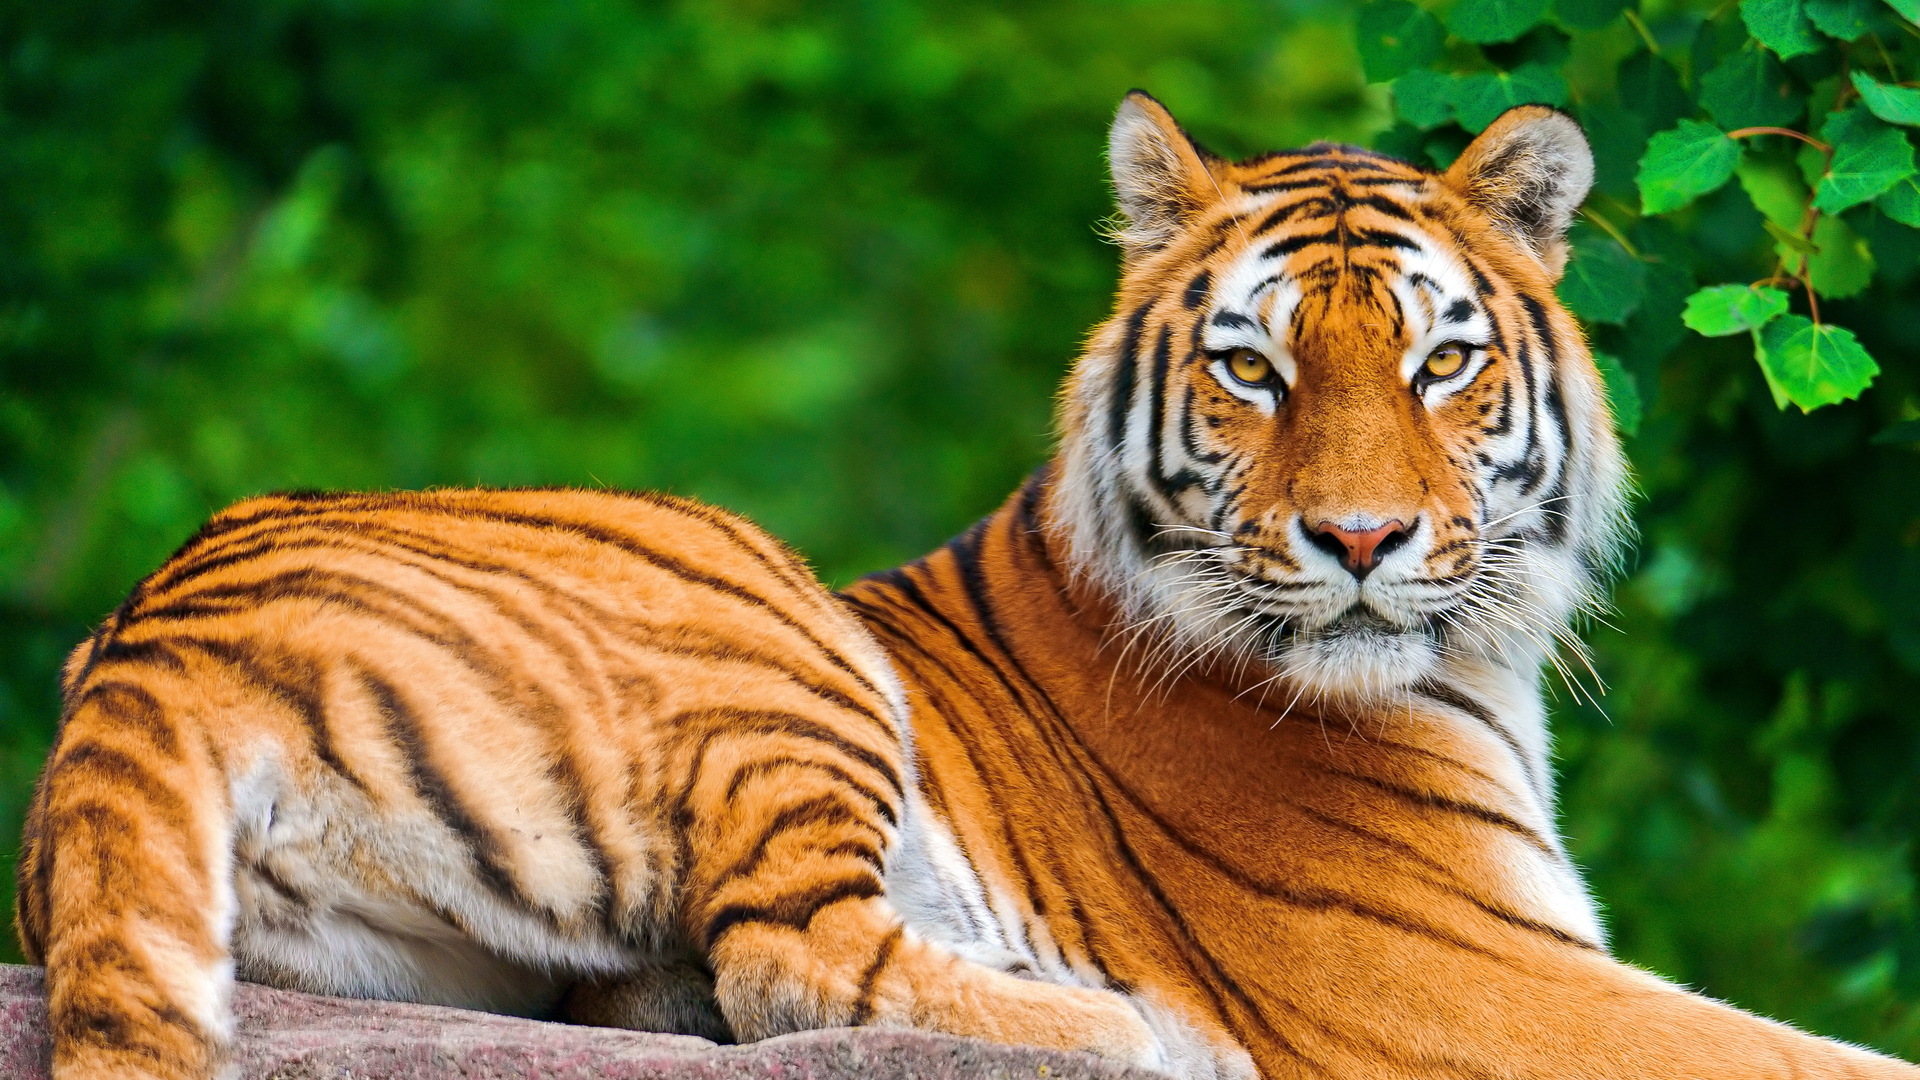 Tiger Meaning and Definition